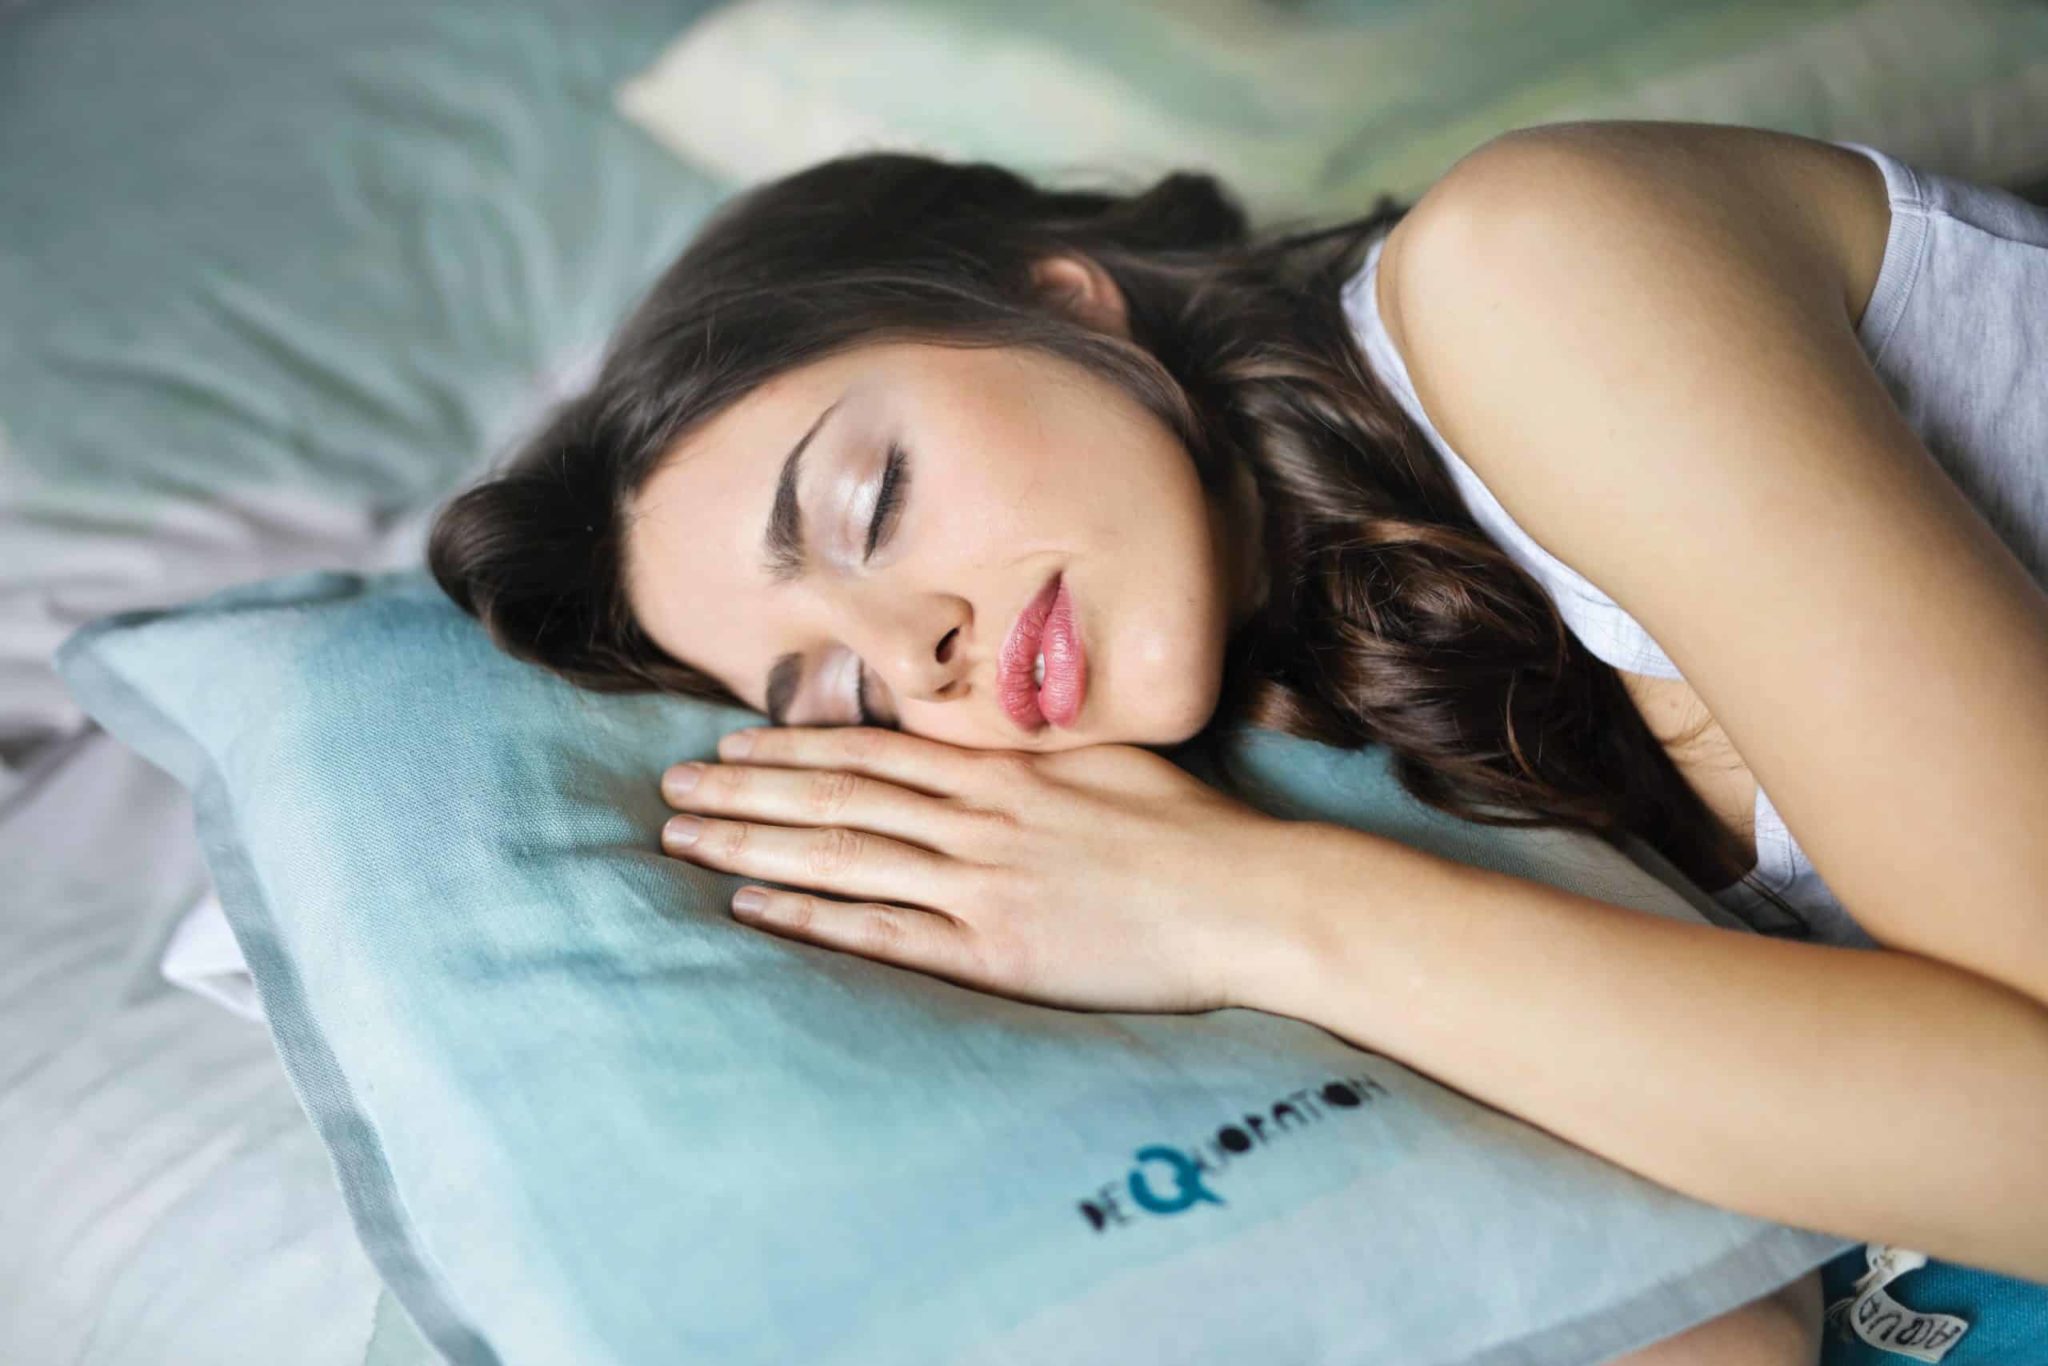 Practice regular sleep rhythms—going to bed and waking up at the same time each day creates a rhythm to your body.